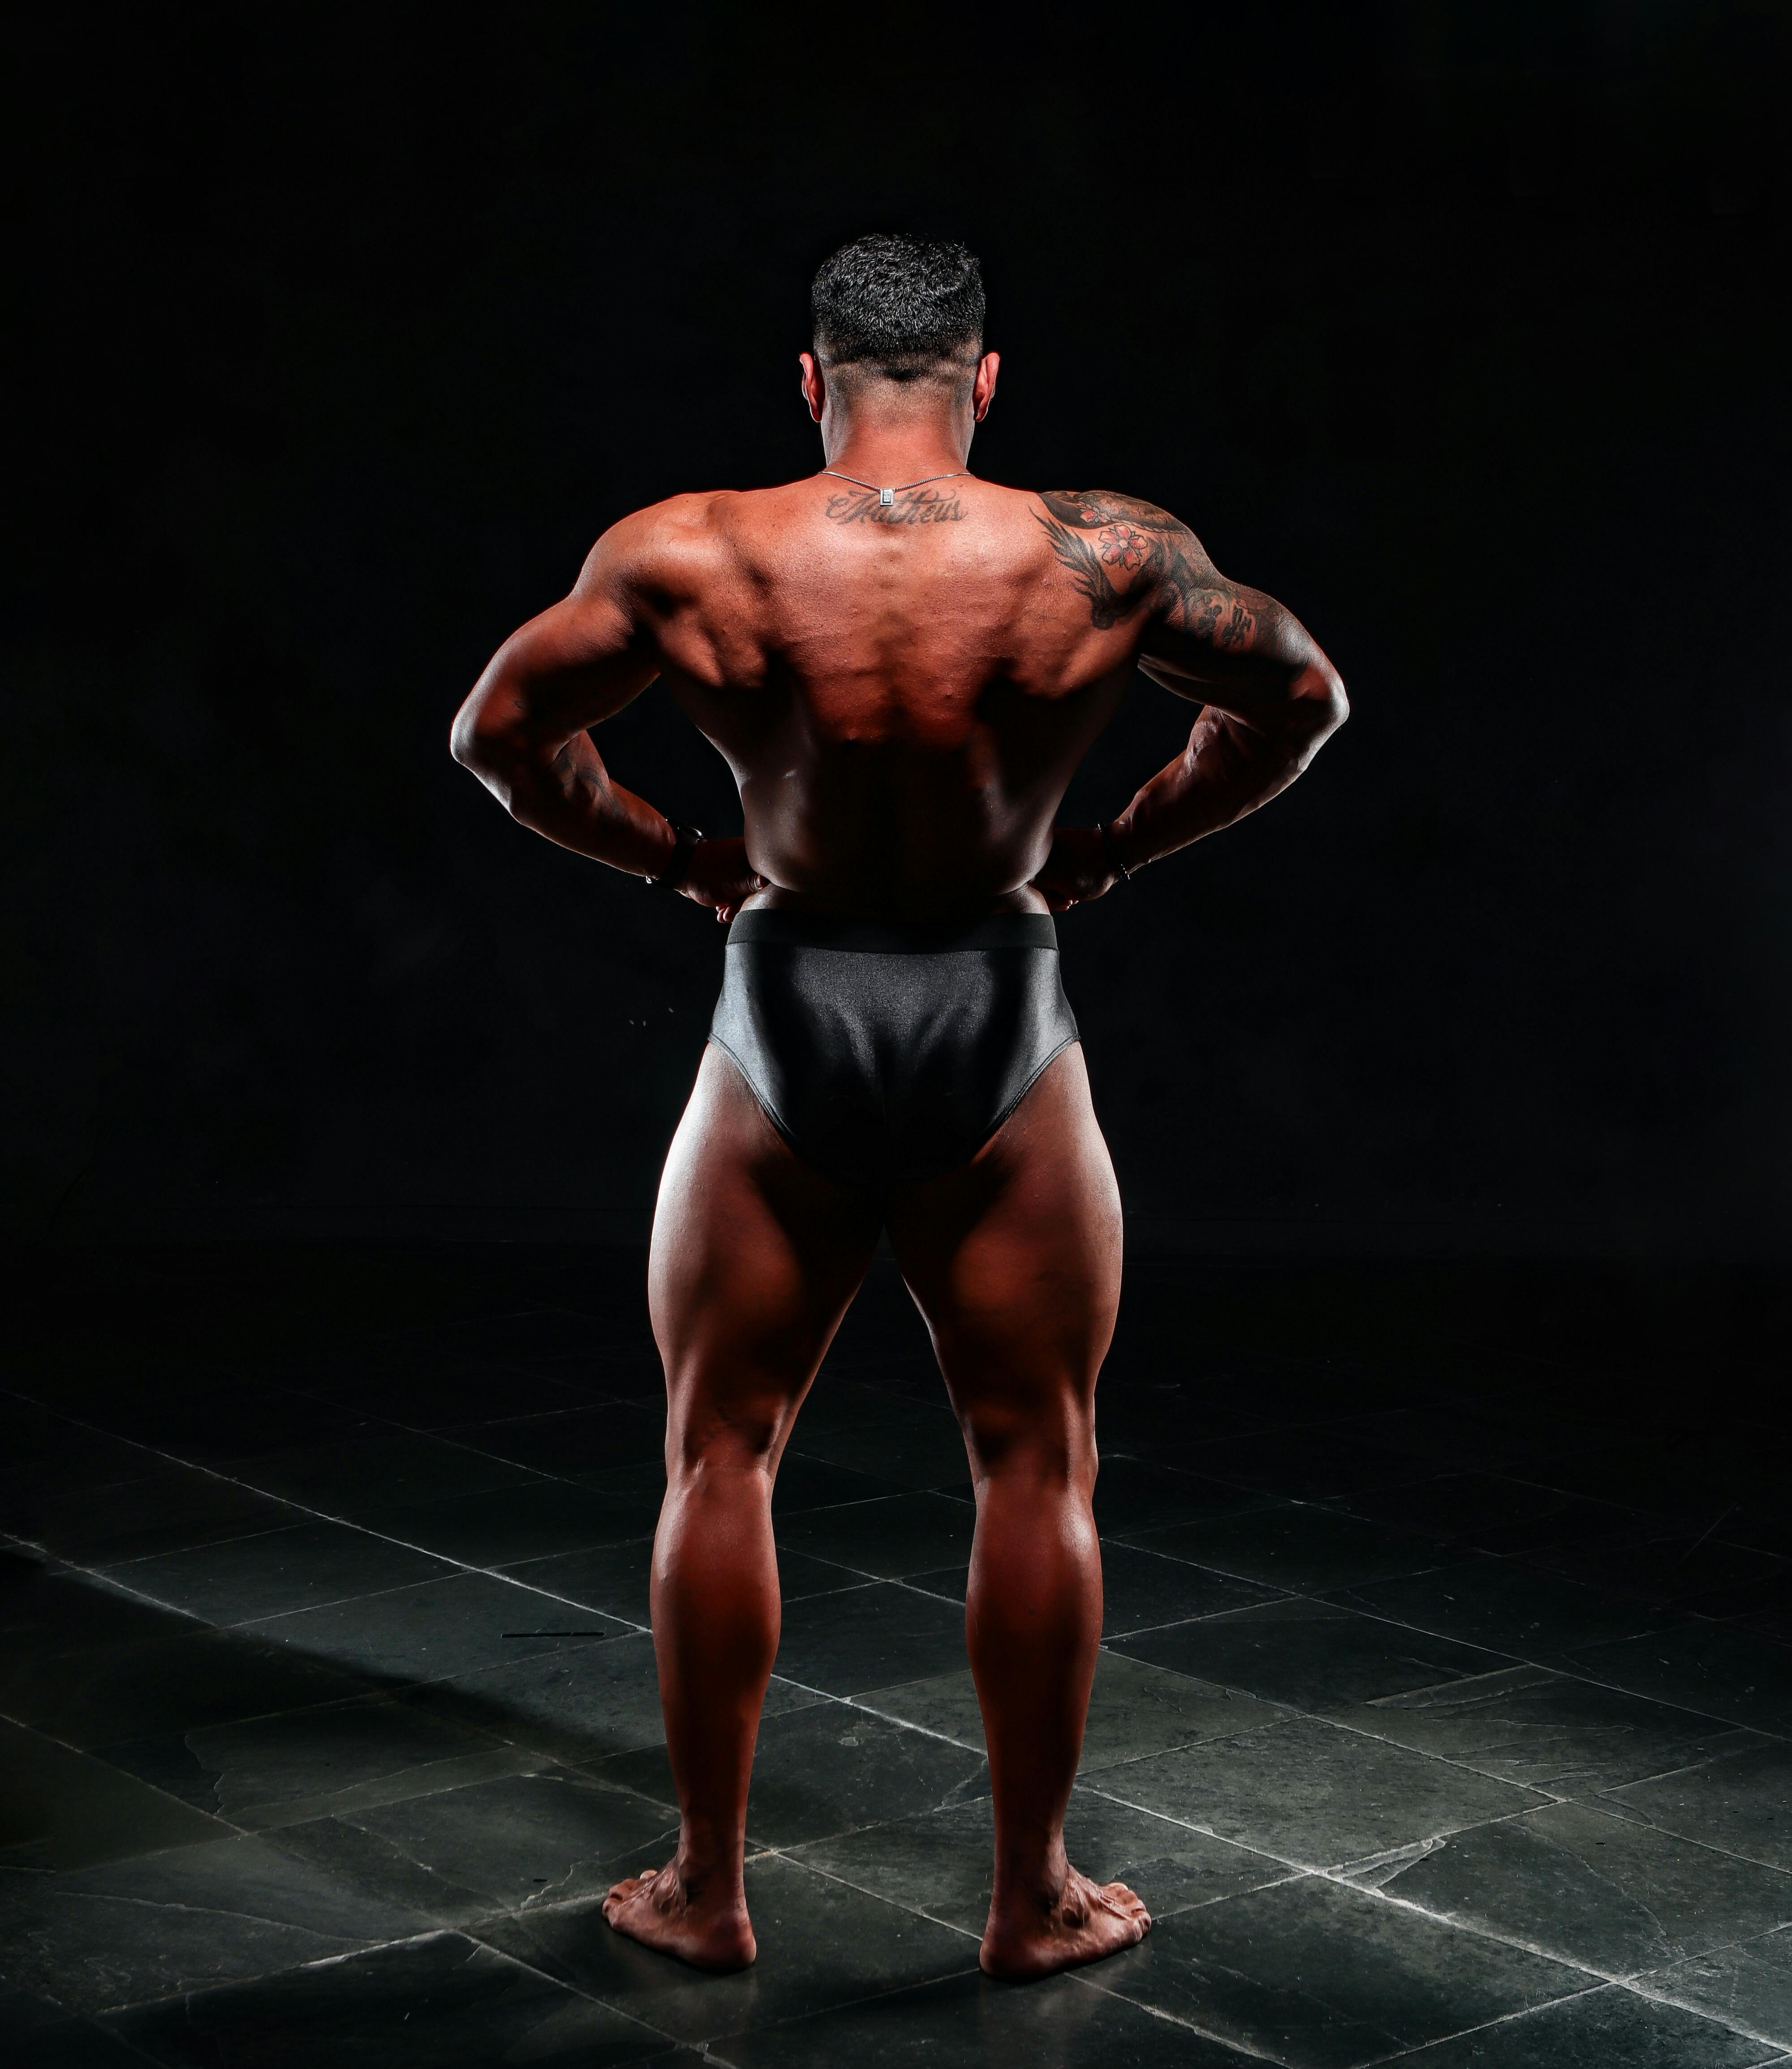 Bodybuilder posing at gym - back view full lenght portrait - Stock Image -  Everypixel